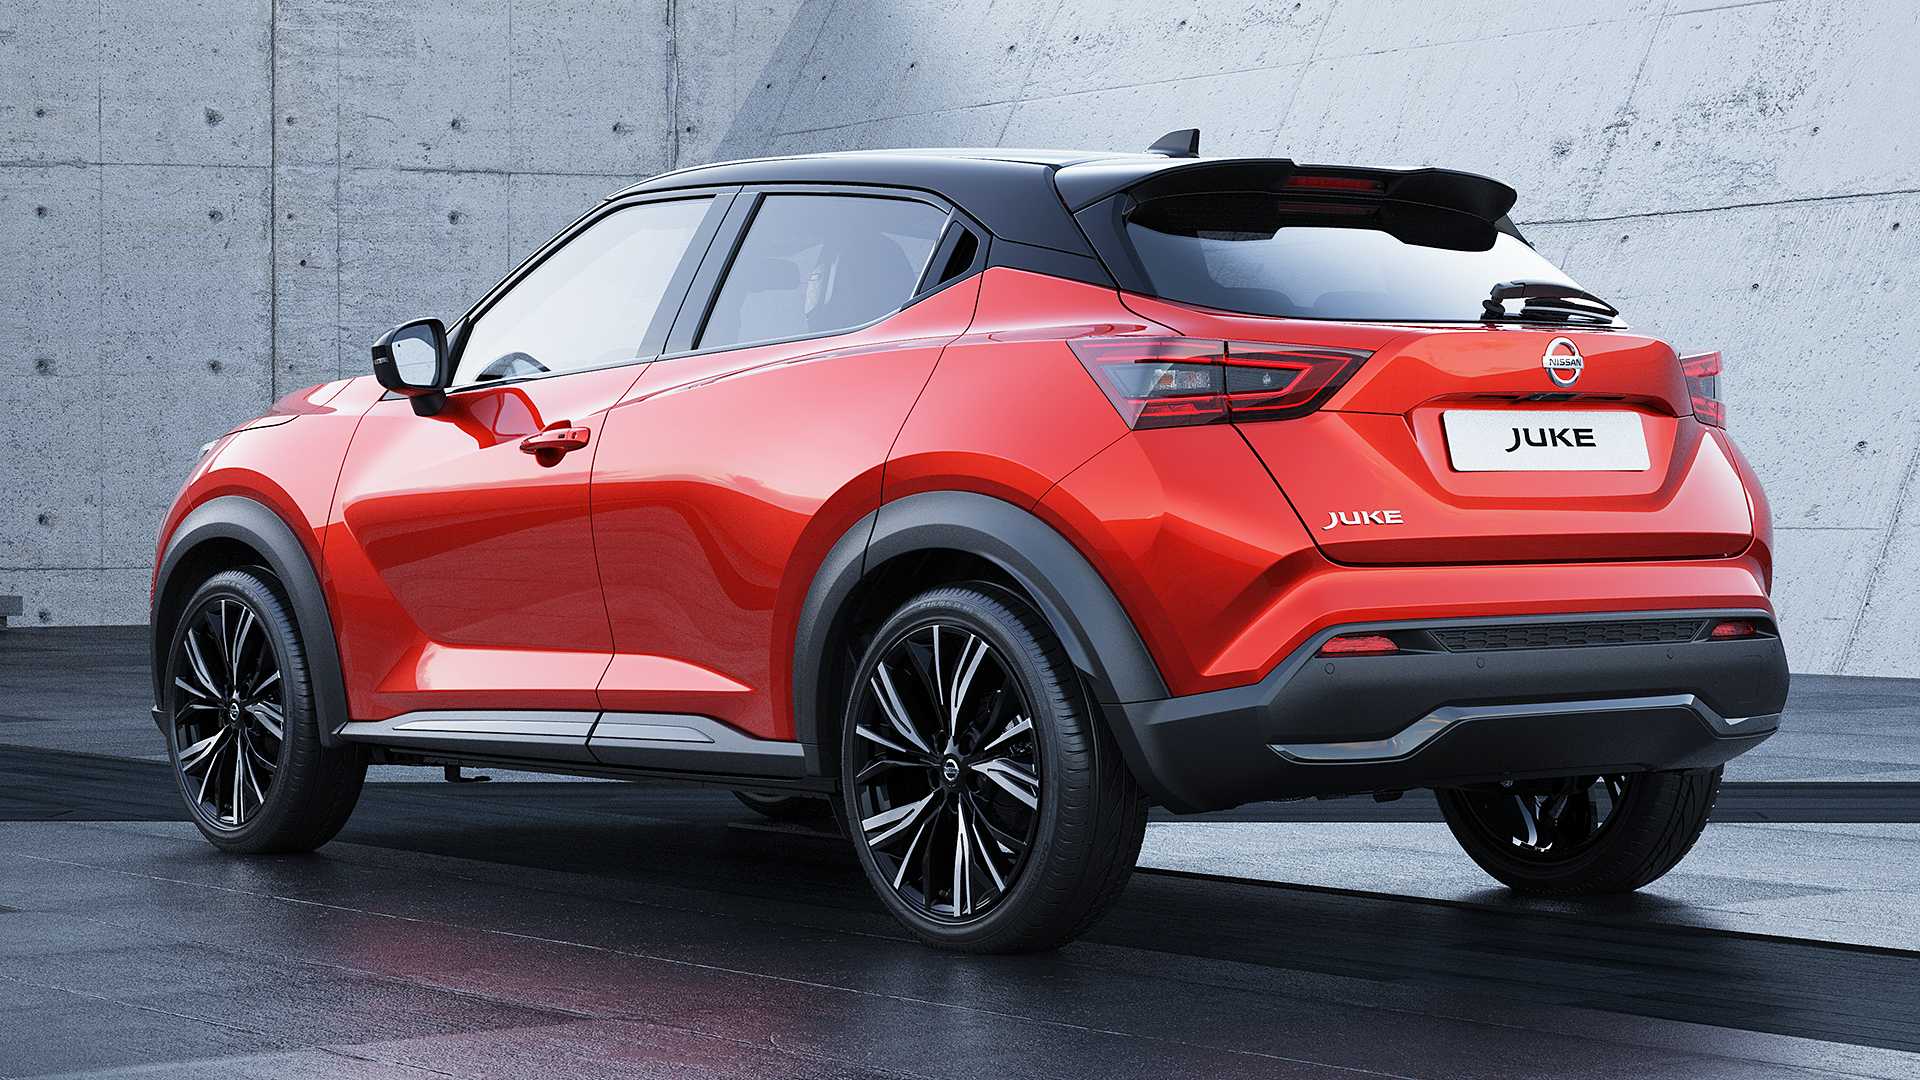 Nissan Juke hybrid review good things come in small packages   NationalWorld